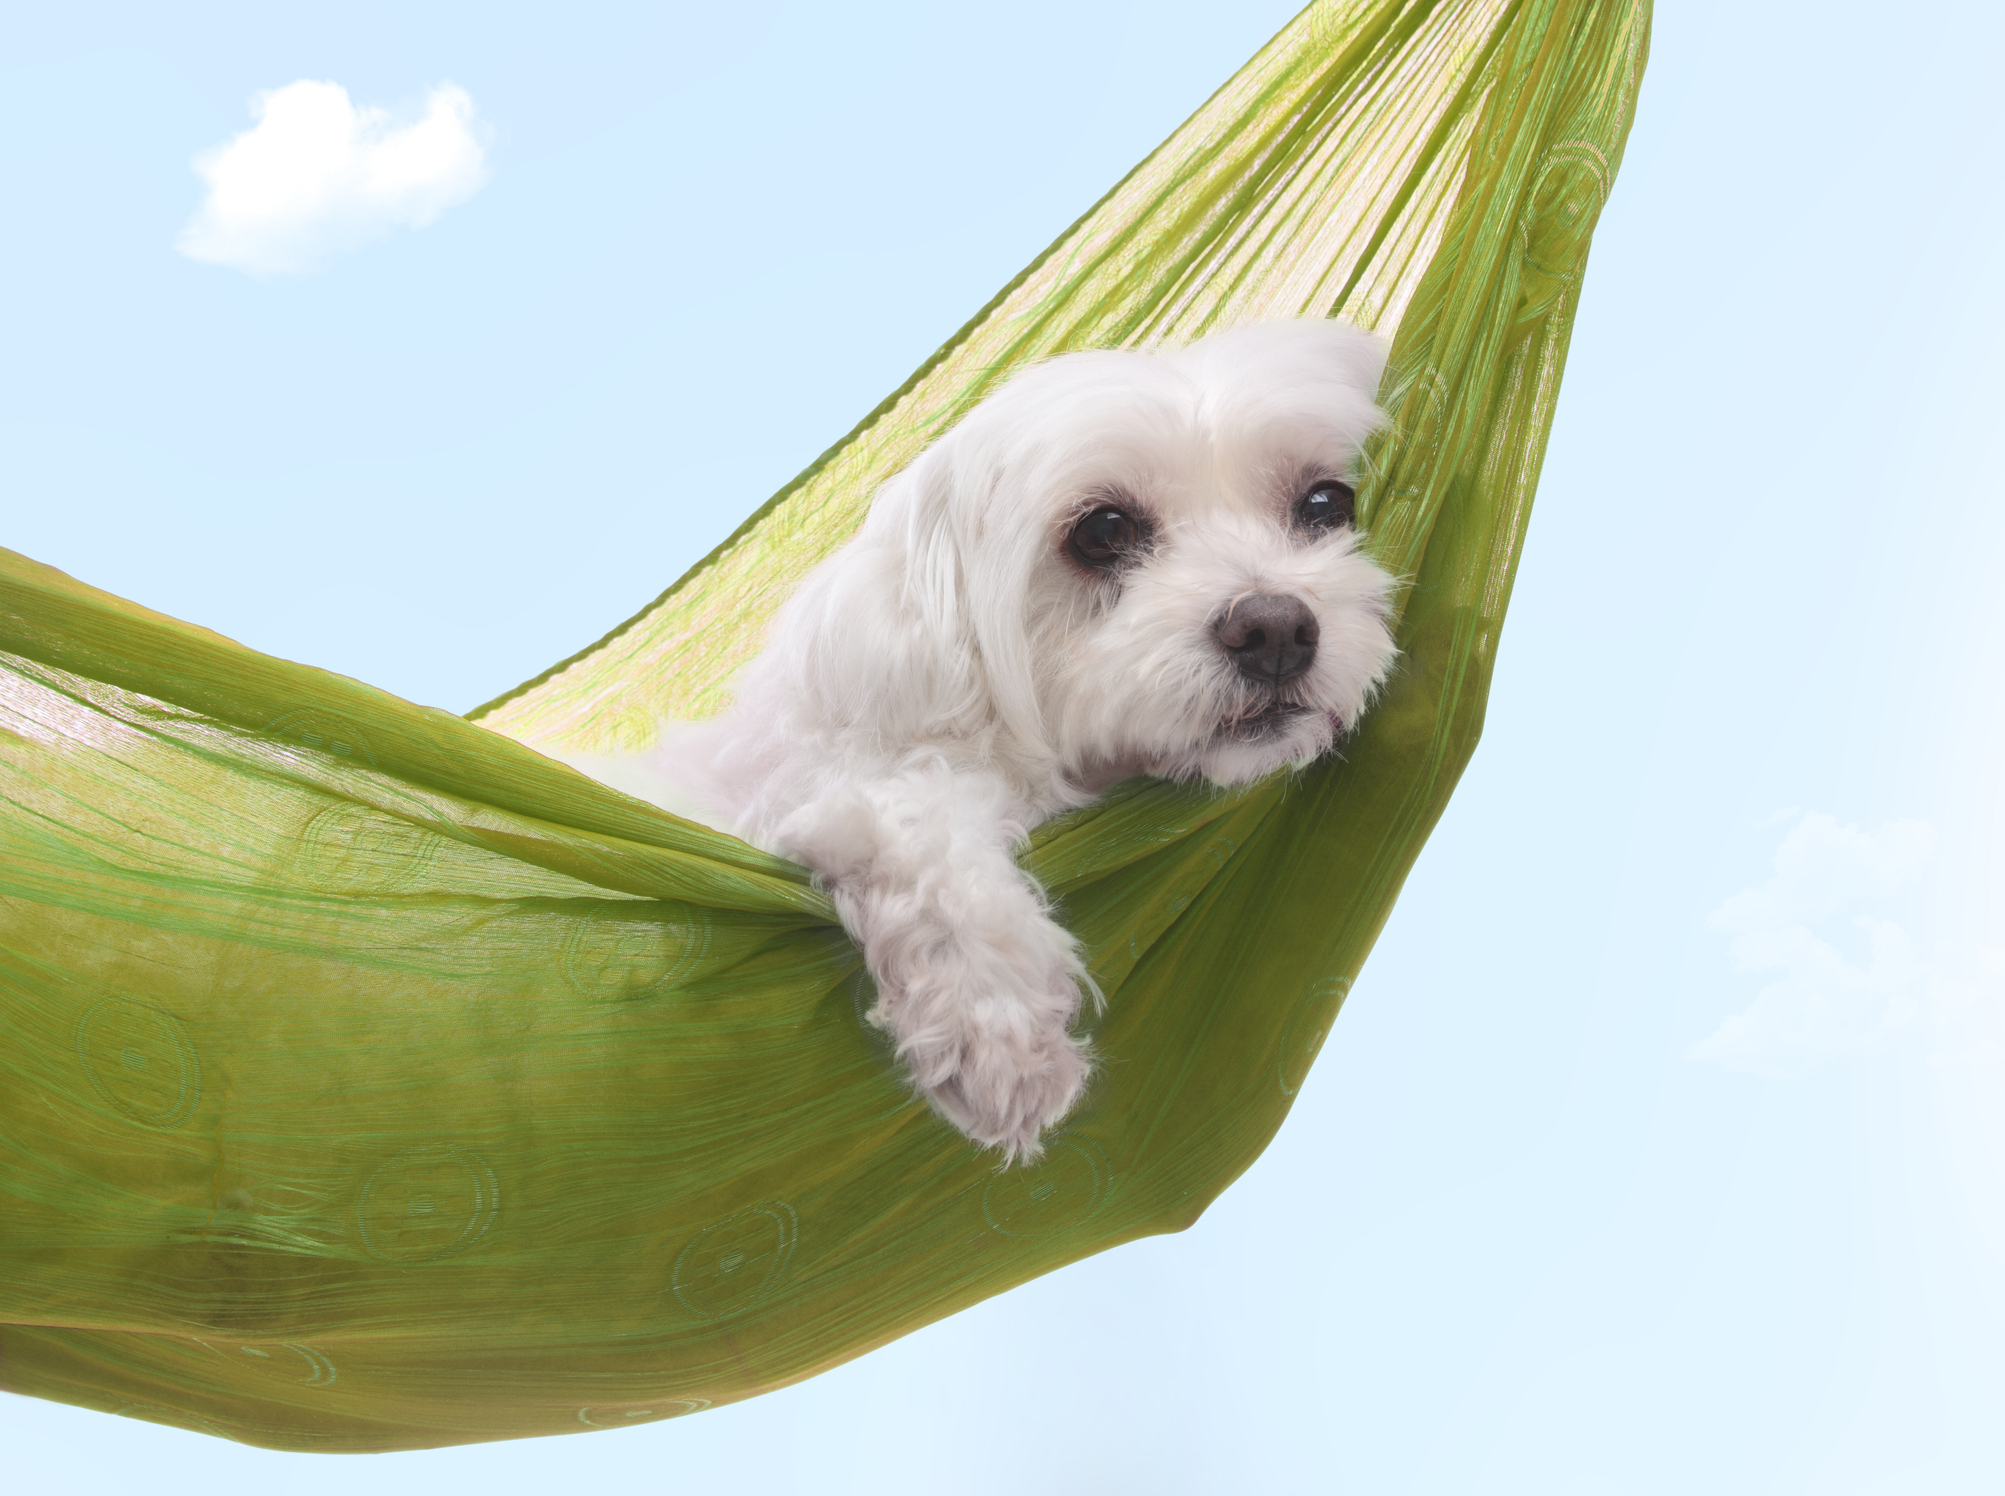 July Market Predictions - Prepare for the Dog Days of Summer